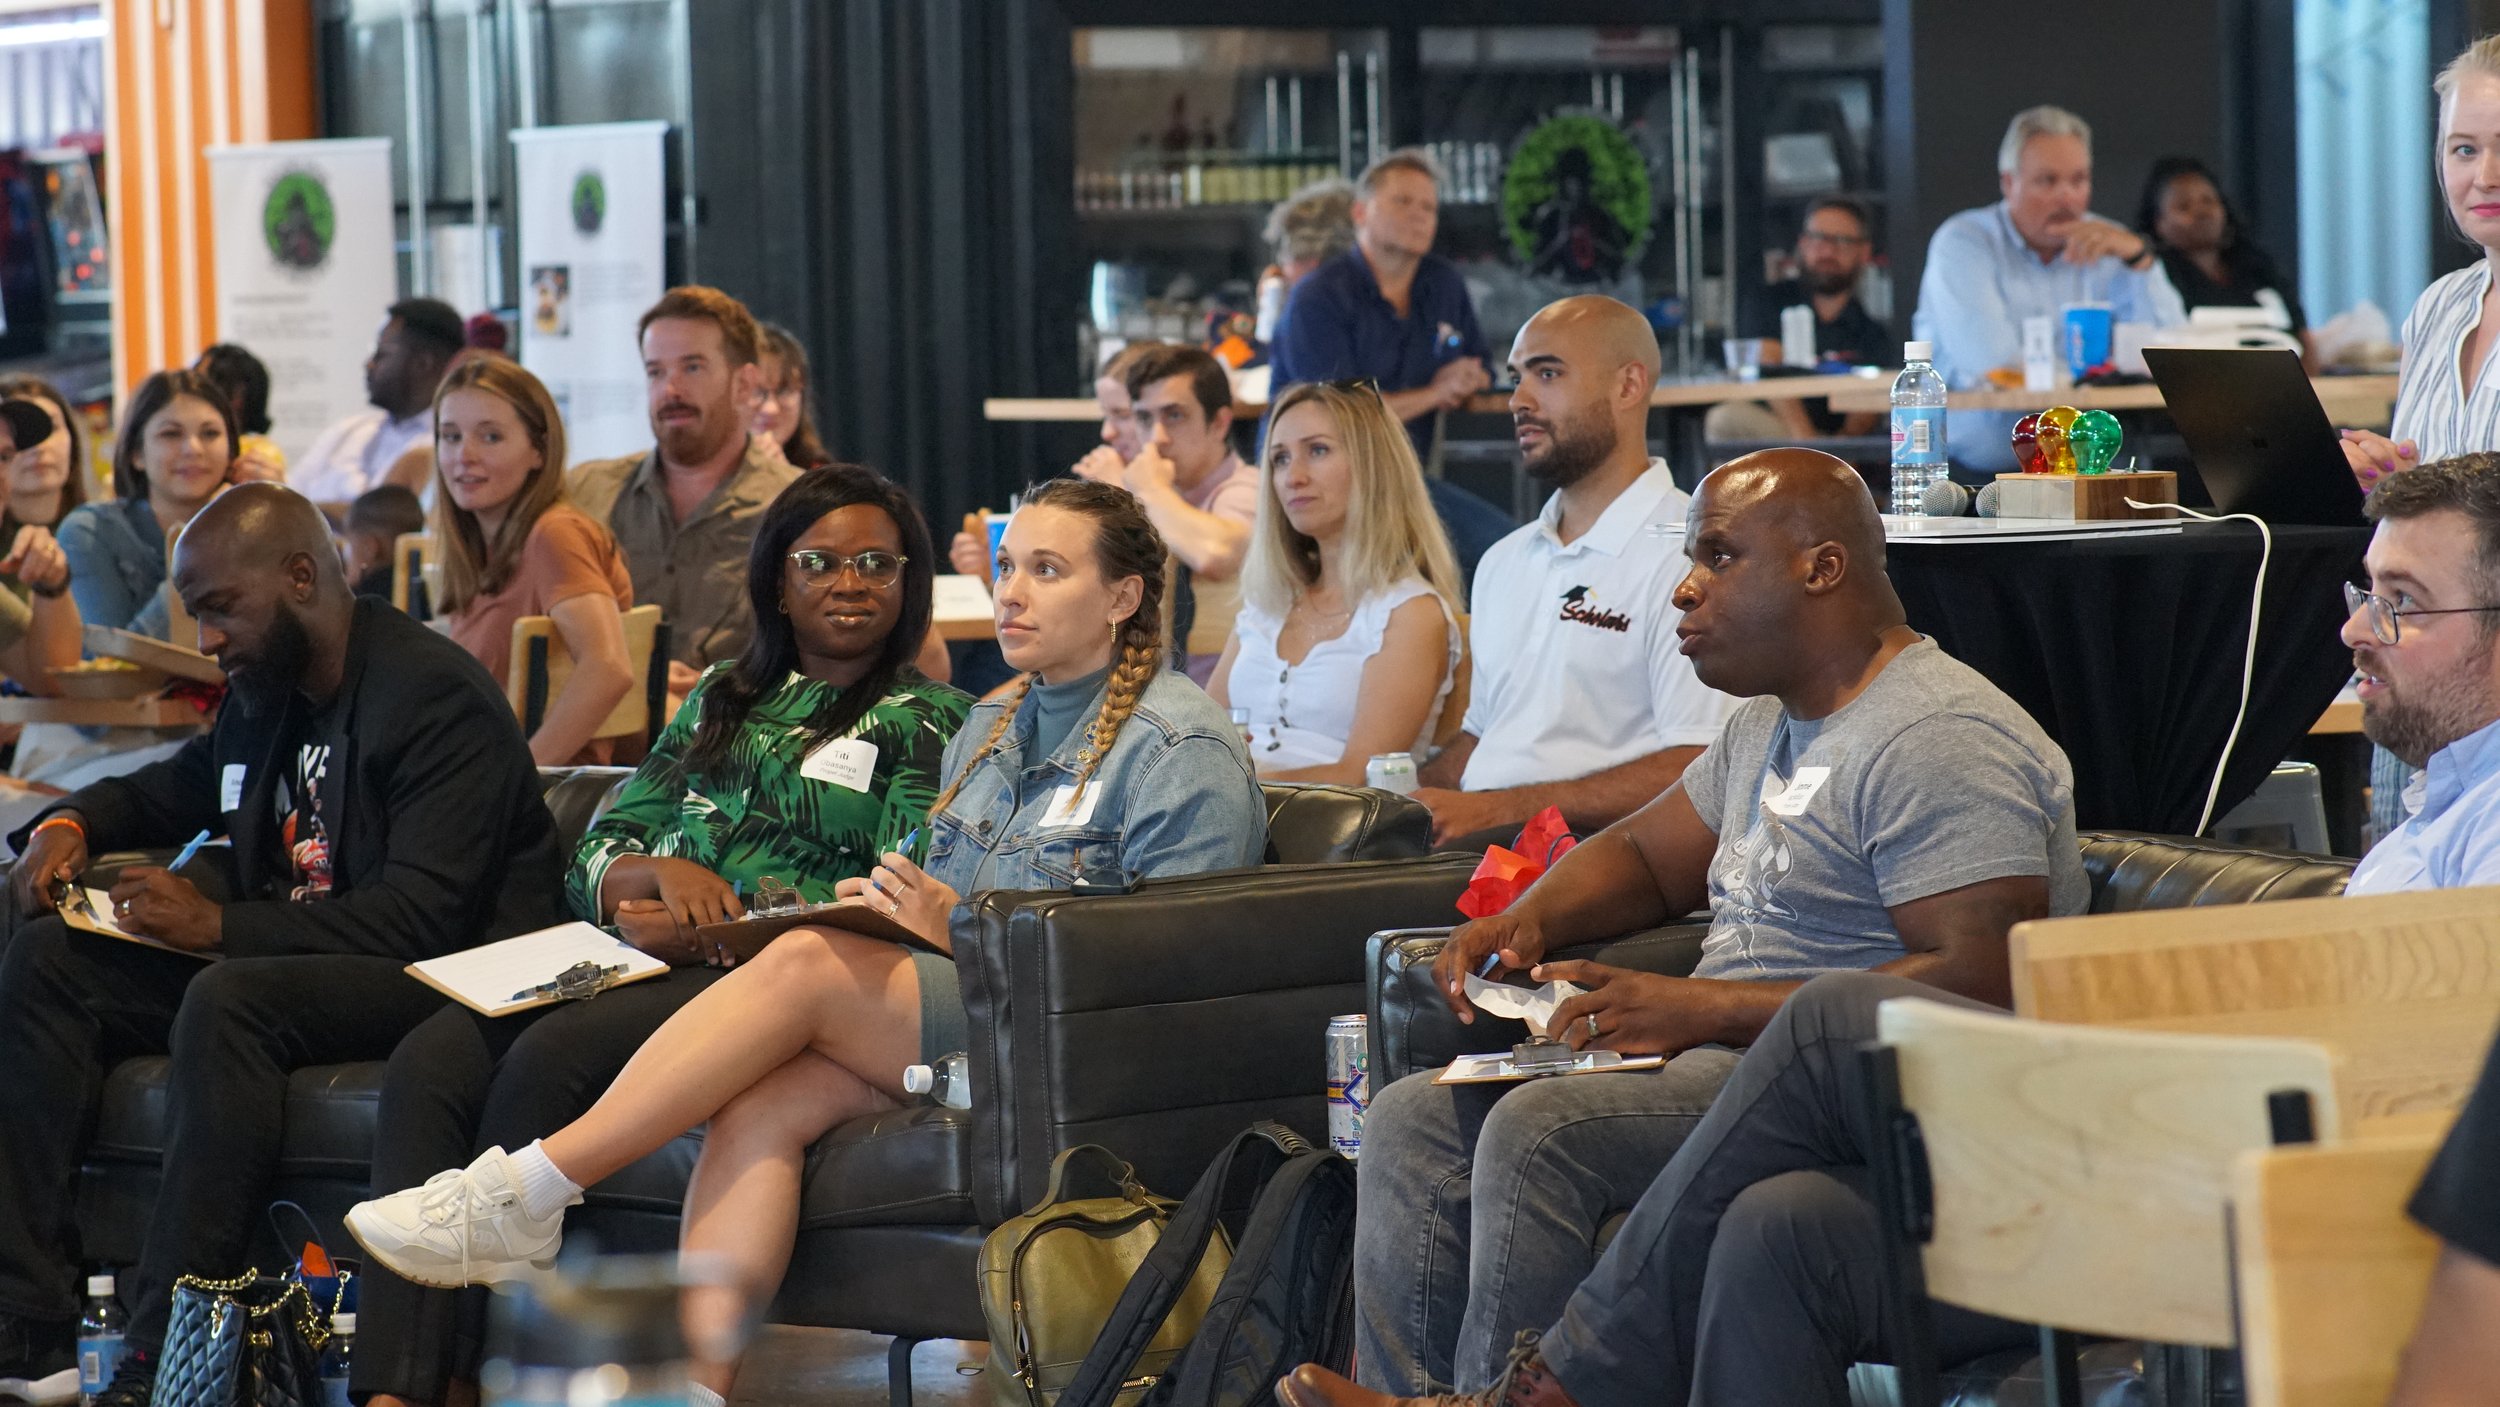  Seated in the front row, a panel of judges listens to pitches June 14, 2022, at Propel. At United Way’s live competition,  human services organizations pitched their ideas on how to reduce barriers for those from under-resourced communities and asse